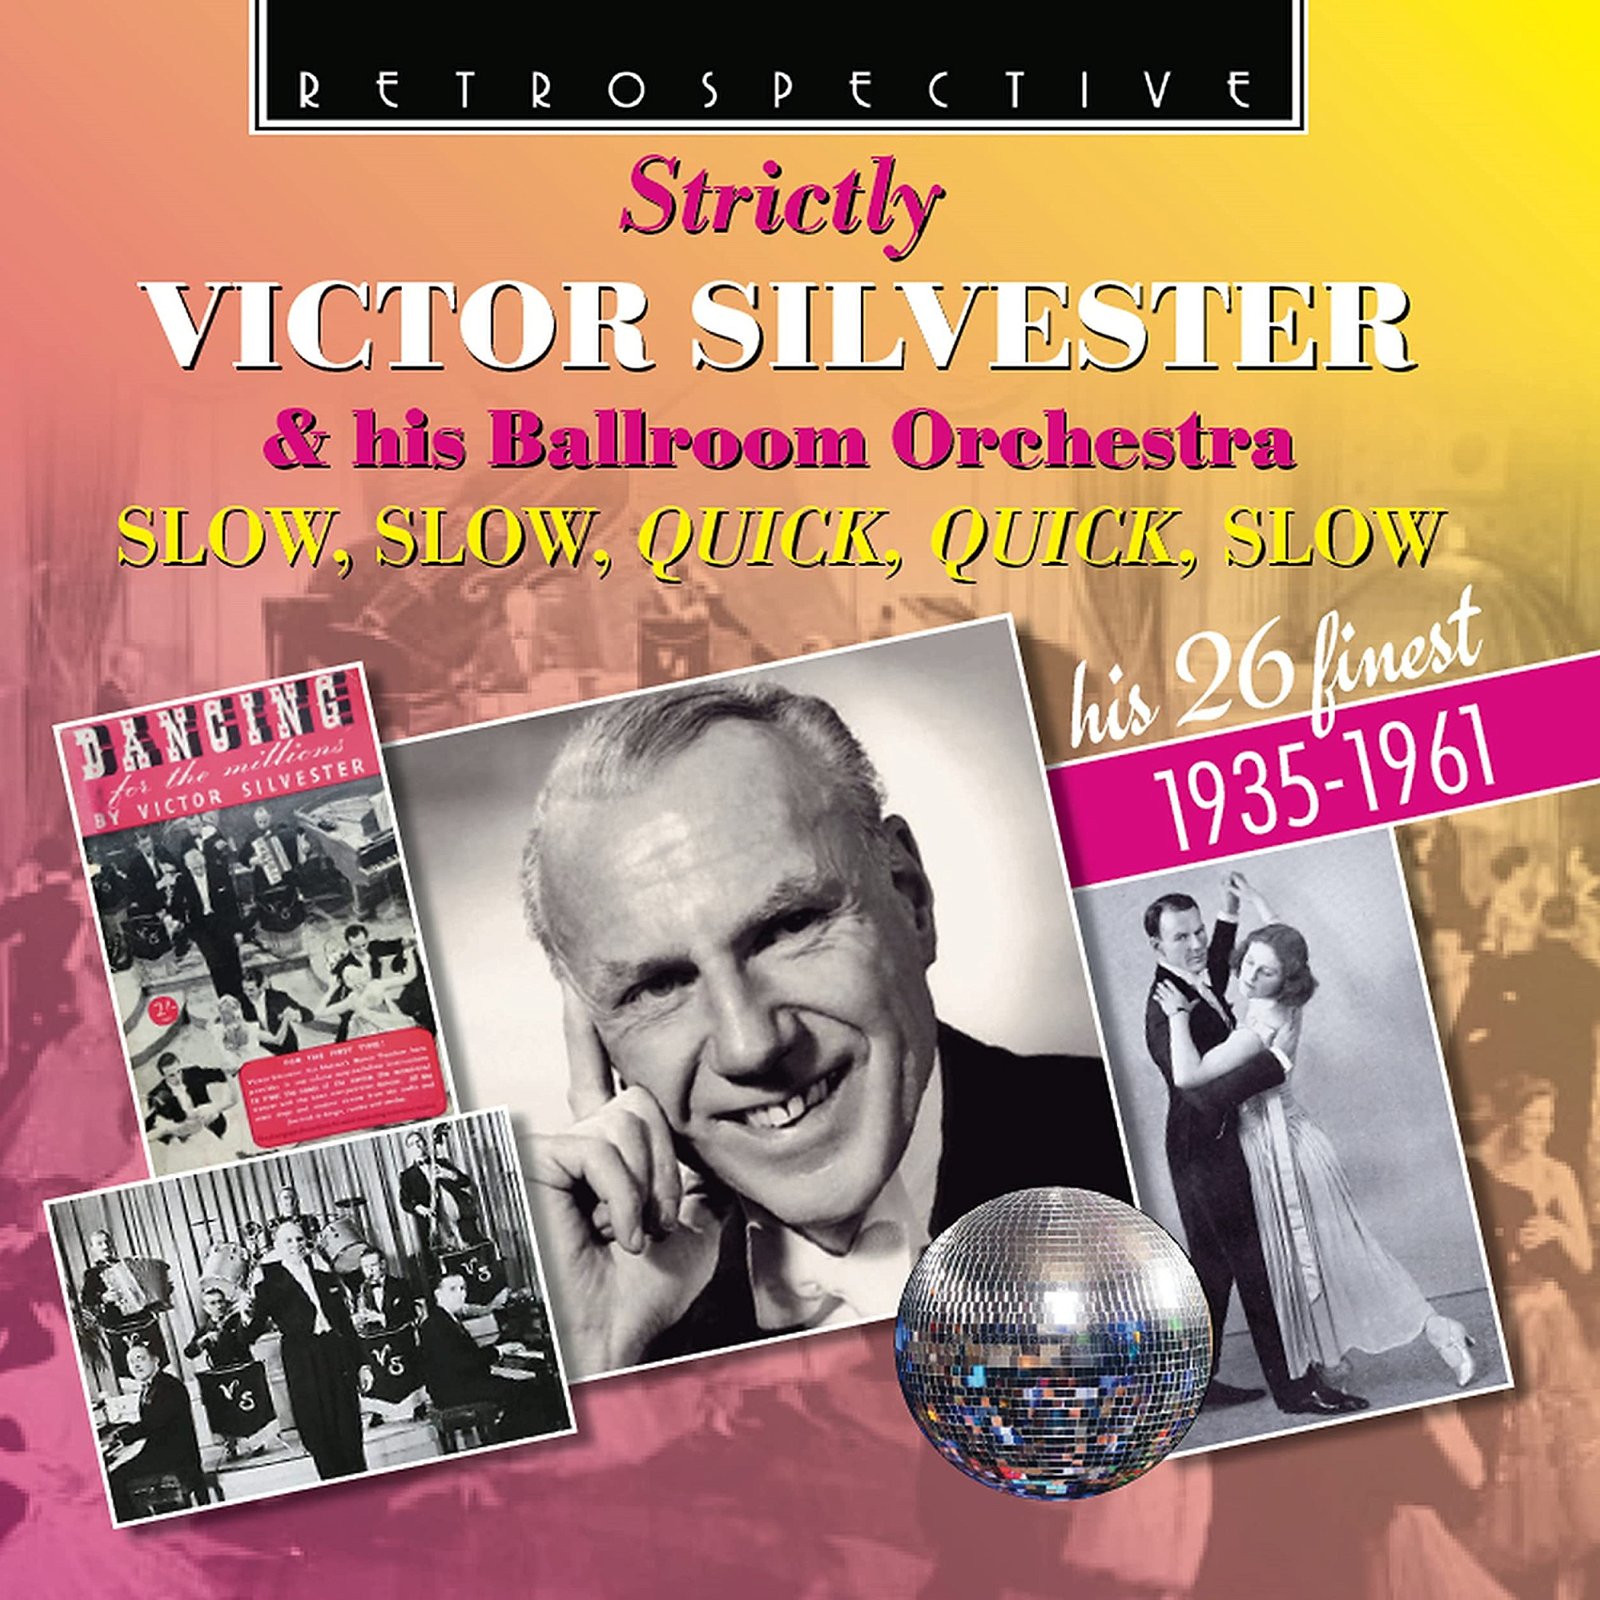 CD Shop - SILVESTER, VICTOR STRICTLY VICTOR SILVESTER & HIS BALLROOM ORCHESTRA: SLOW, SLOW, QUICK QUICK, SLOW - HIS 26 FINEST 1935-1961